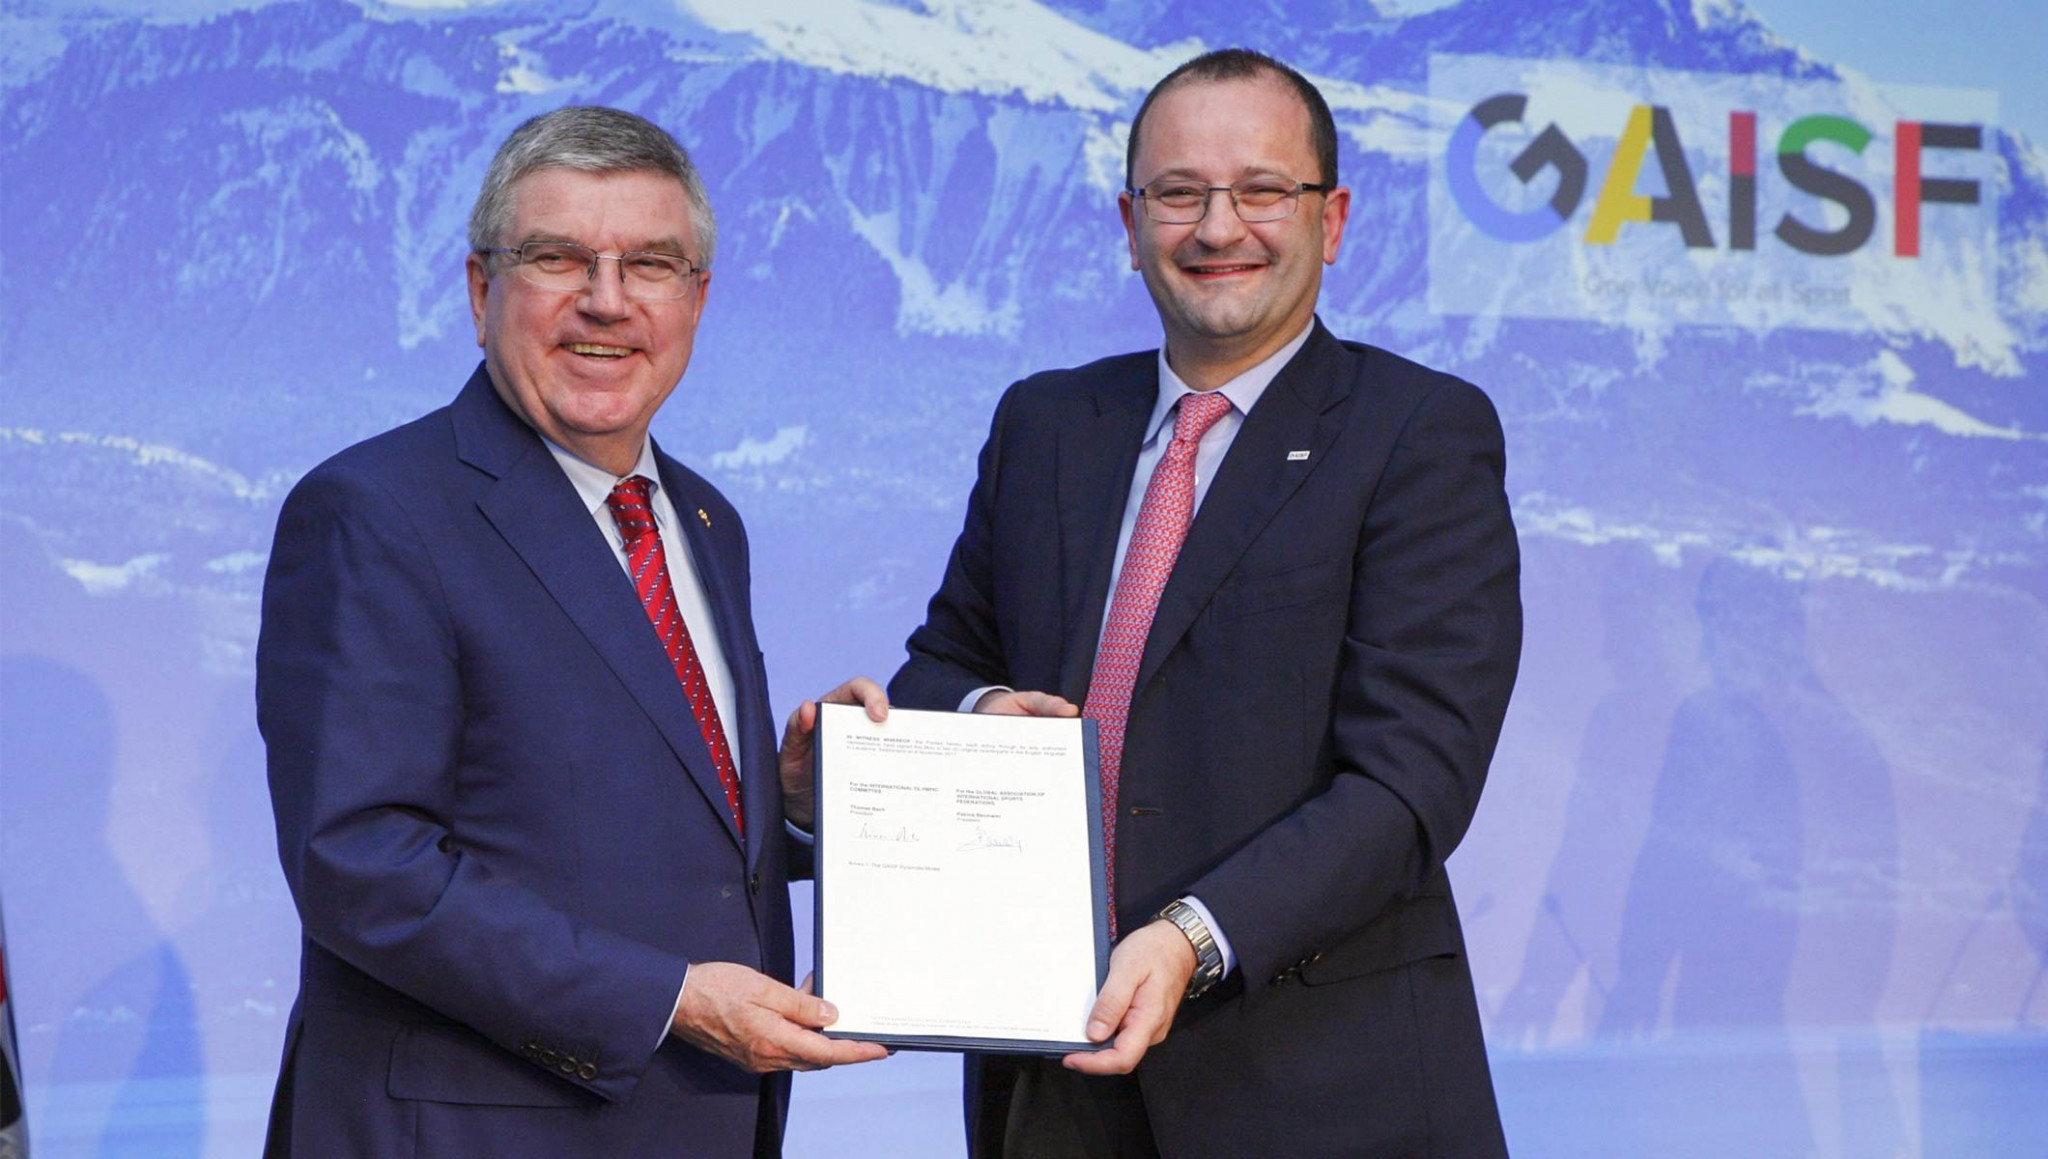 IOC President Thomas Bach, left, and GAISF counterpart Patrick Baumann signed the MoU ©IOC